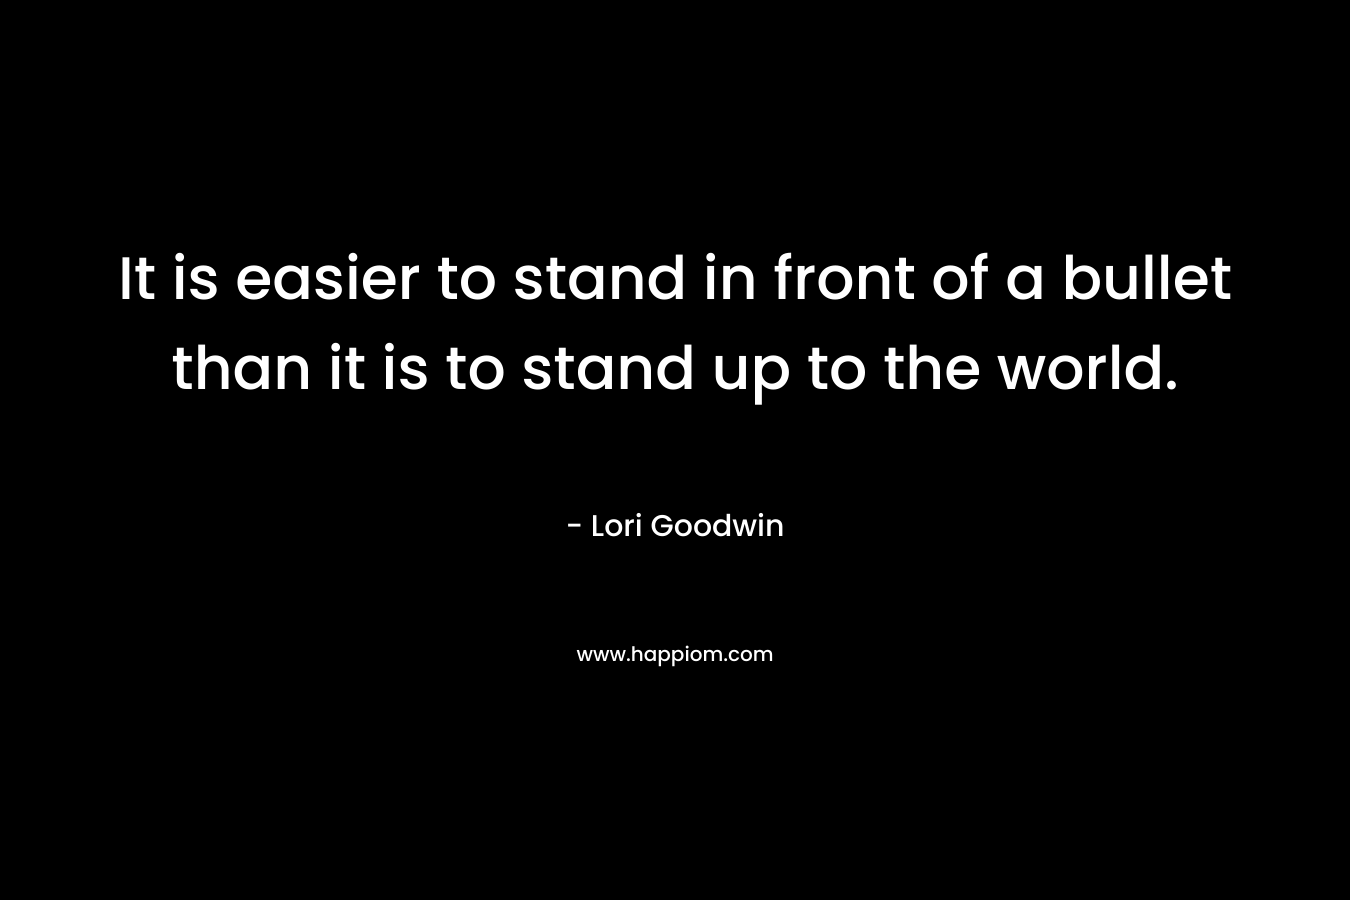 It is easier to stand in front of a bullet than it is to stand up to the world. – Lori Goodwin